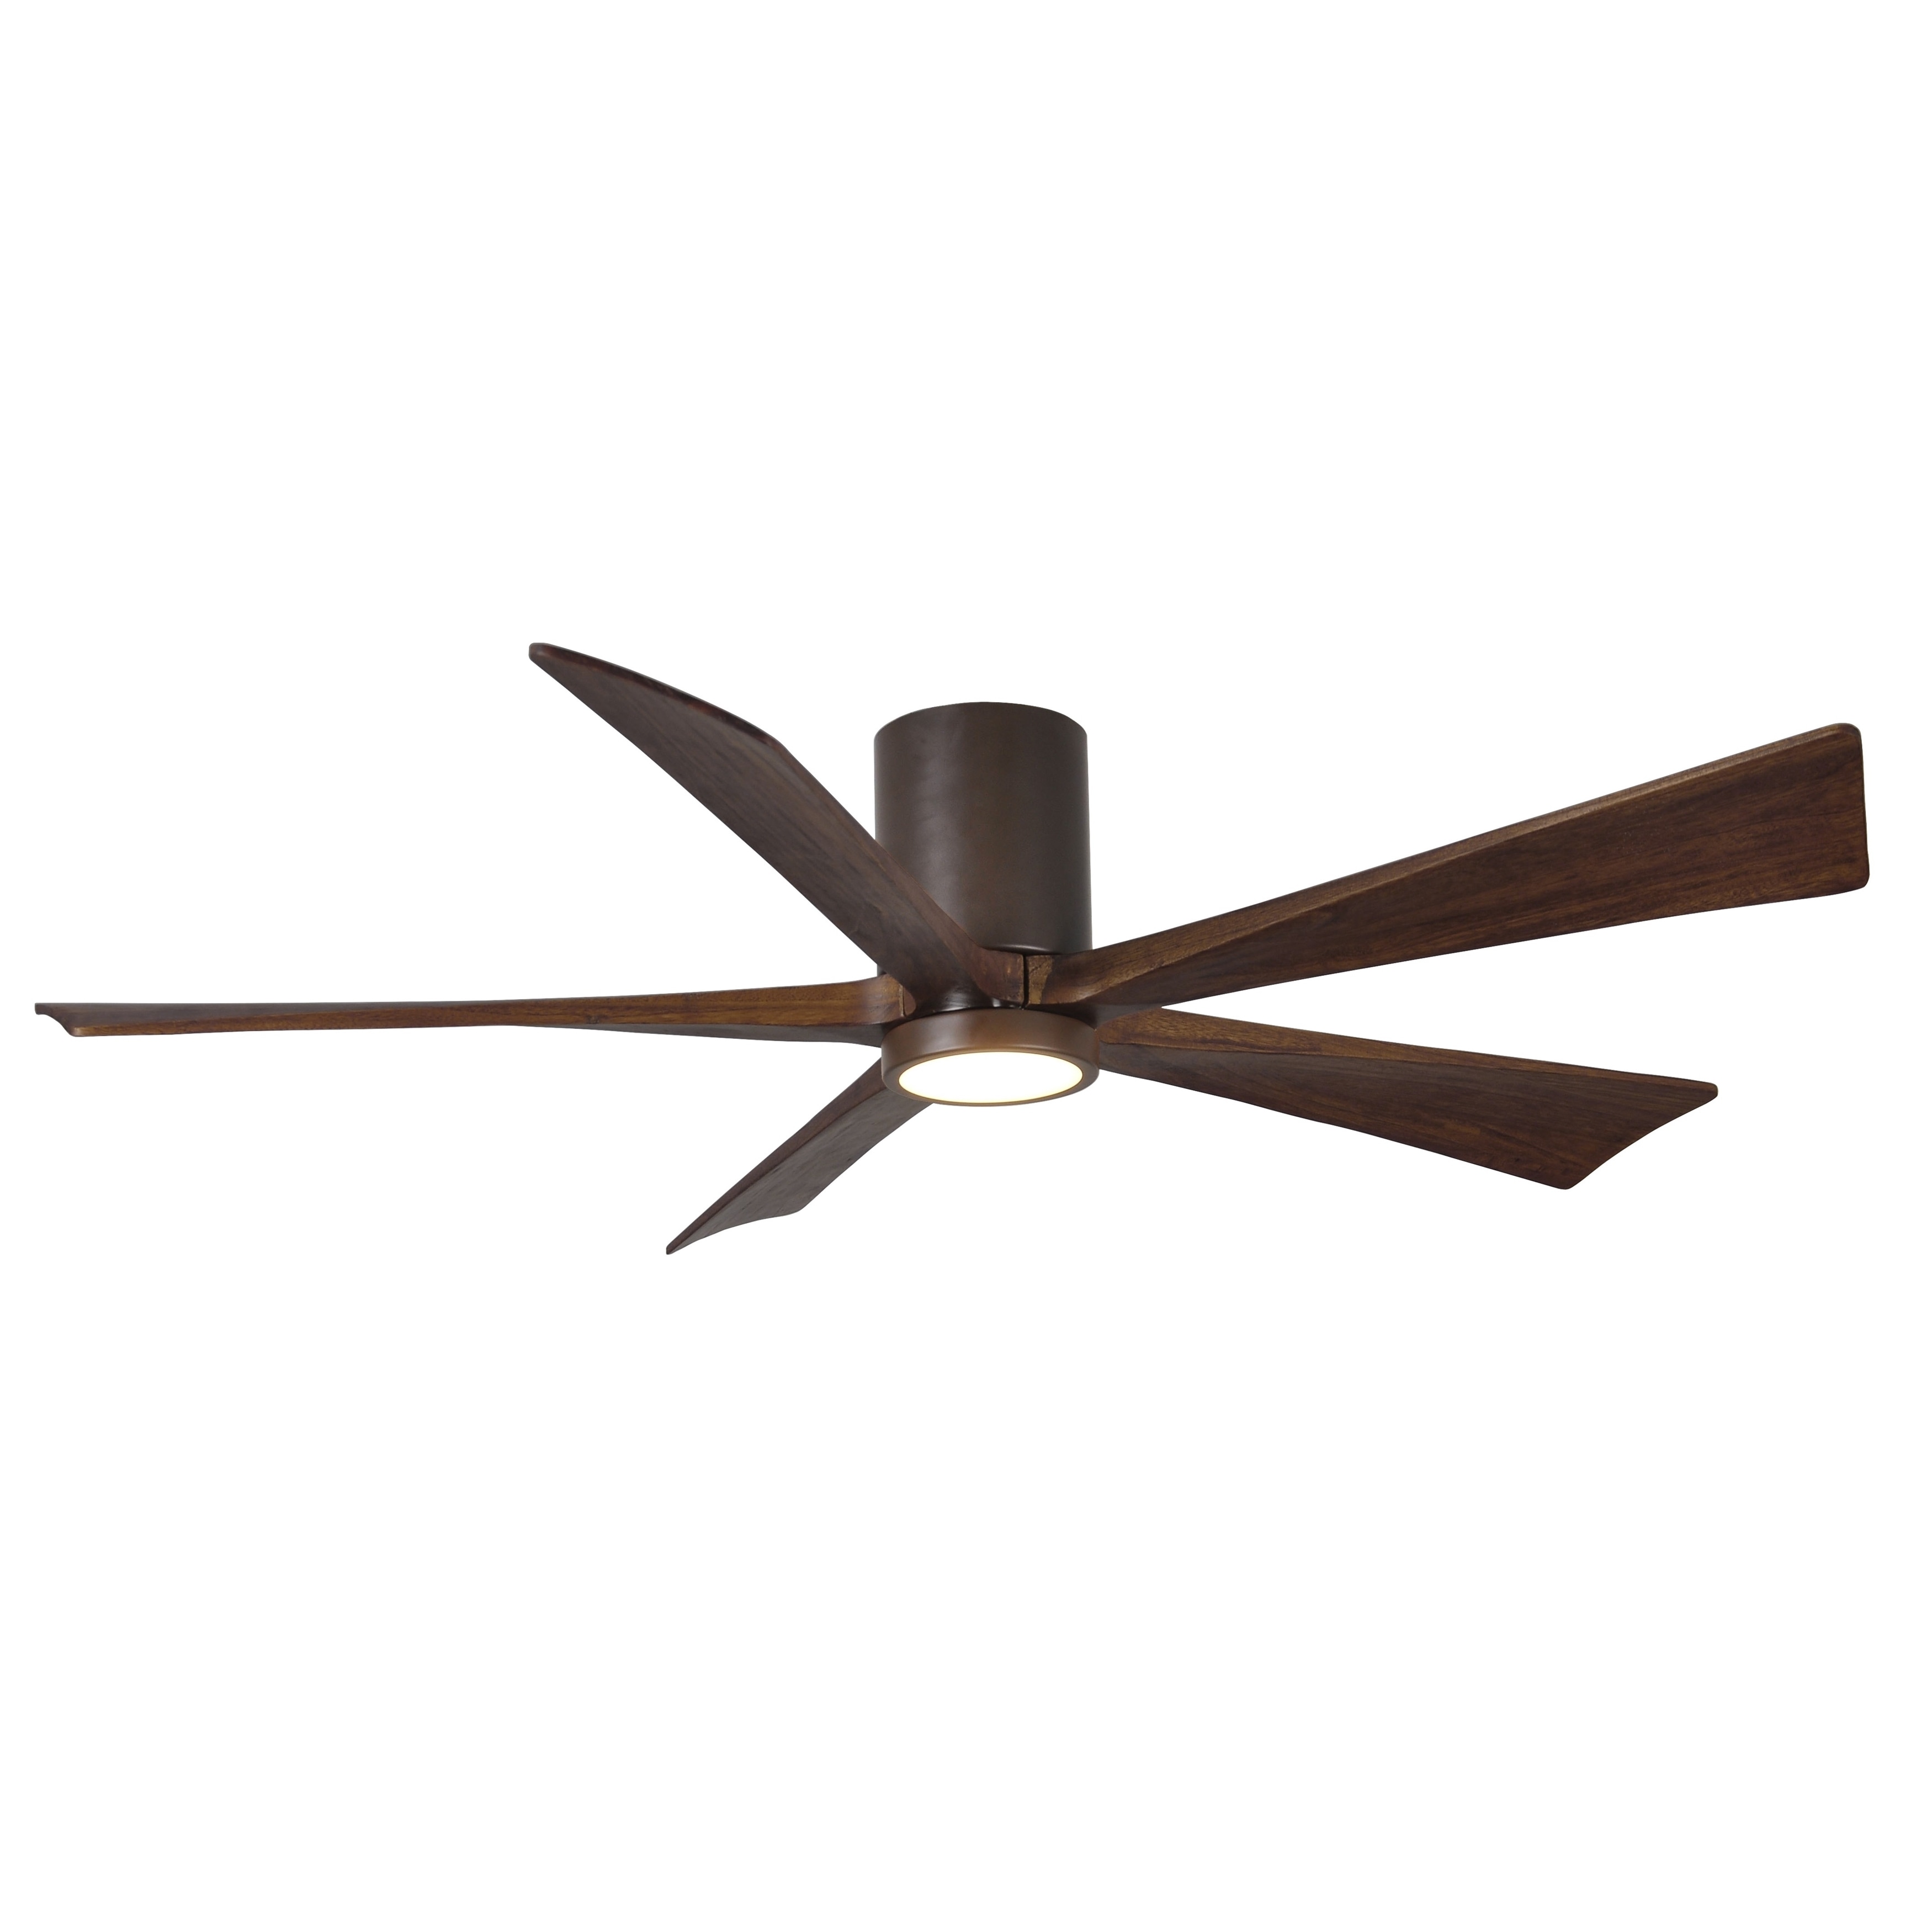 Shop Irene 5 Blade 60 Inch Textured Bronze Hugger Paddle Fan With